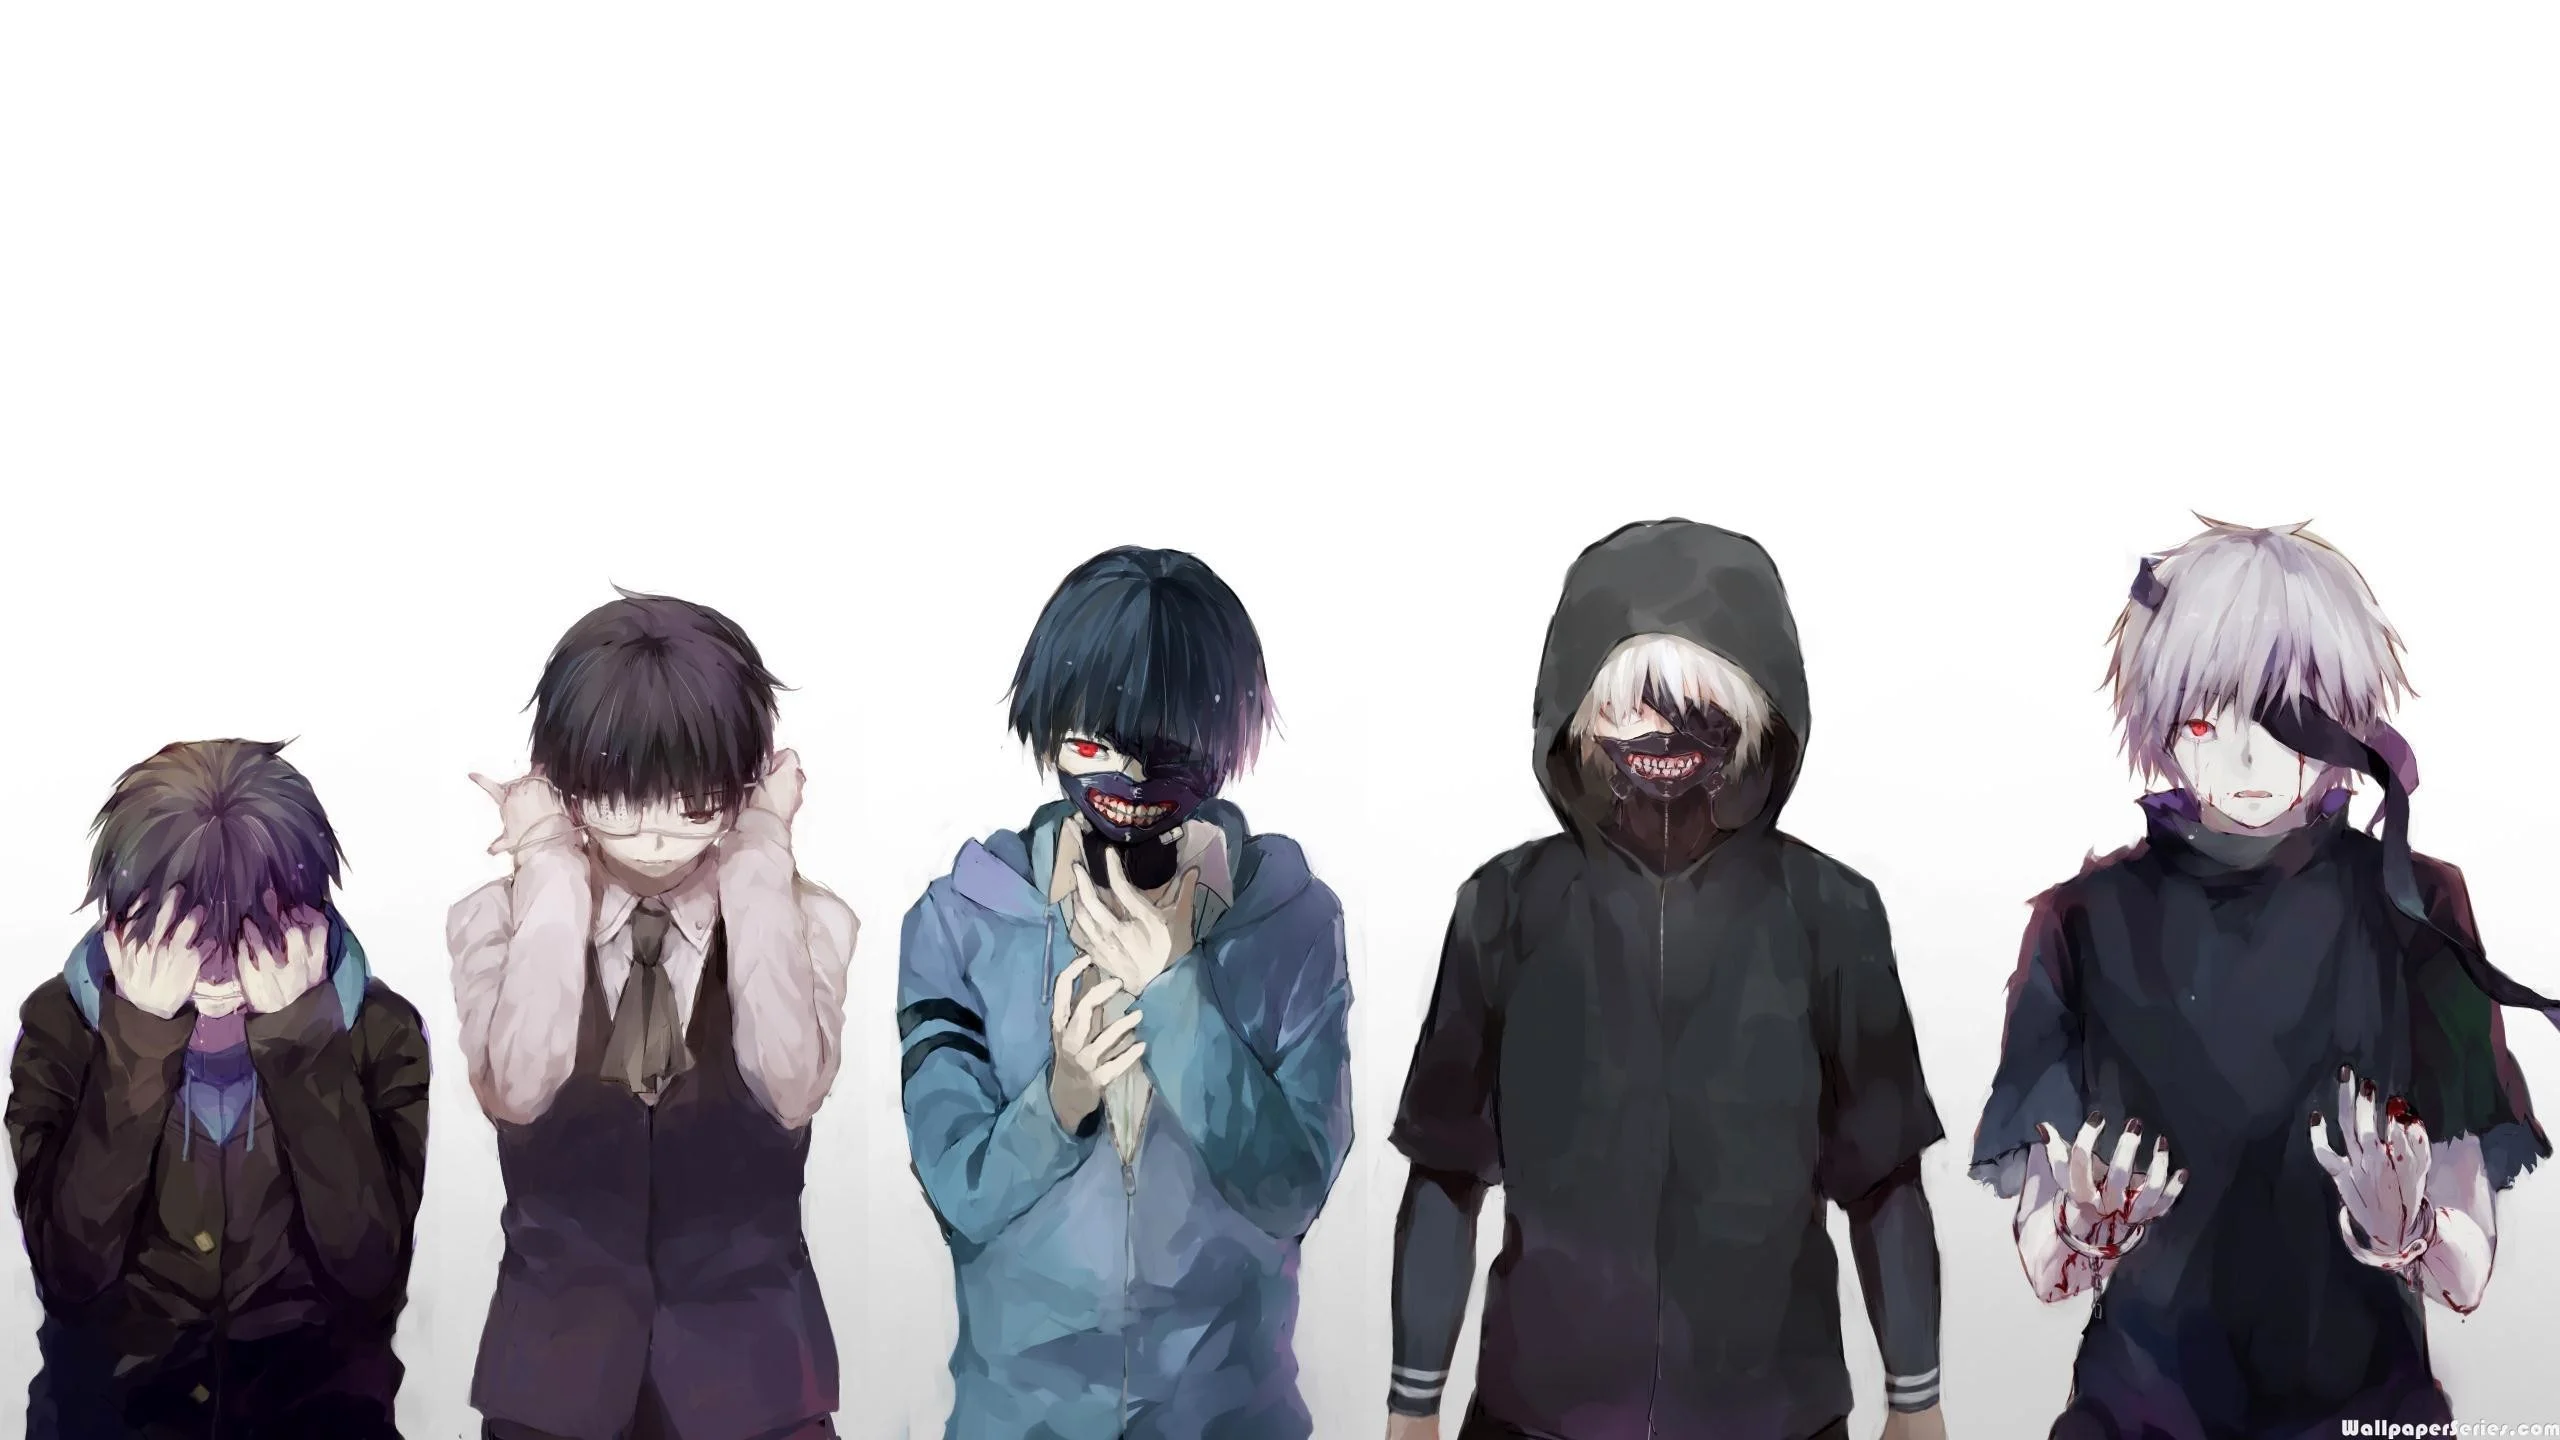 Tokyo ghoul Cmic y anime.Comic and anime. Pinterest Tokyo ghoul